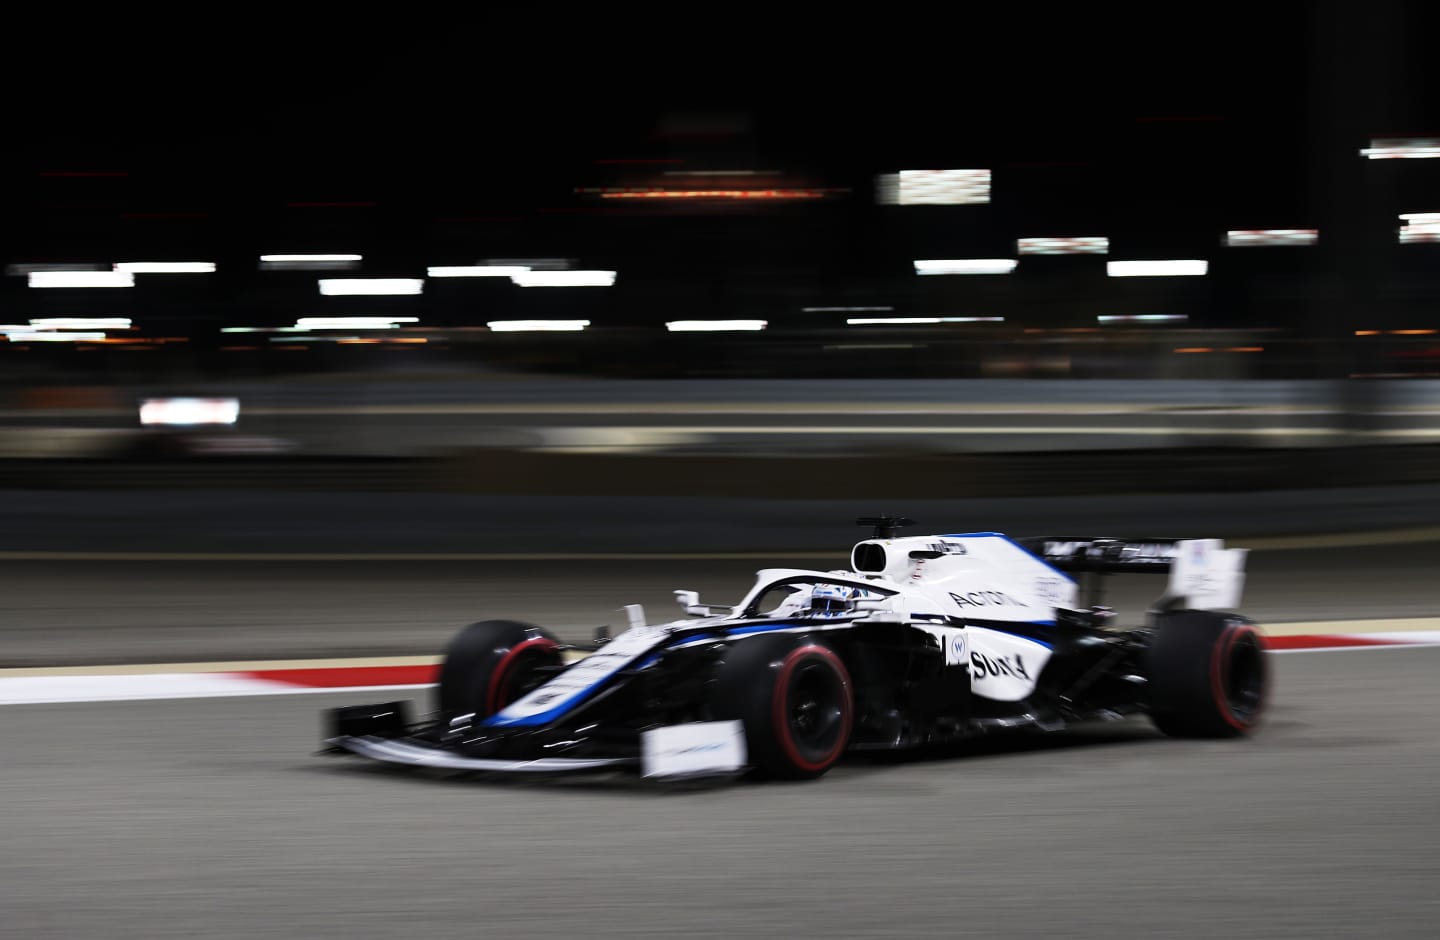 BAHRAIN, BAHRAIN - DECEMBER 04: Jack Aitken of Great Britain driving the Williams Racing FW43 Mercedes on track during practice ahead of the F1 Grand Prix of Sakhir at Bahrain International Circuit on December 04, 2020 in Bahrain, Bahrain. (Photo by Kamran Jebreili - Pool/Getty Images)